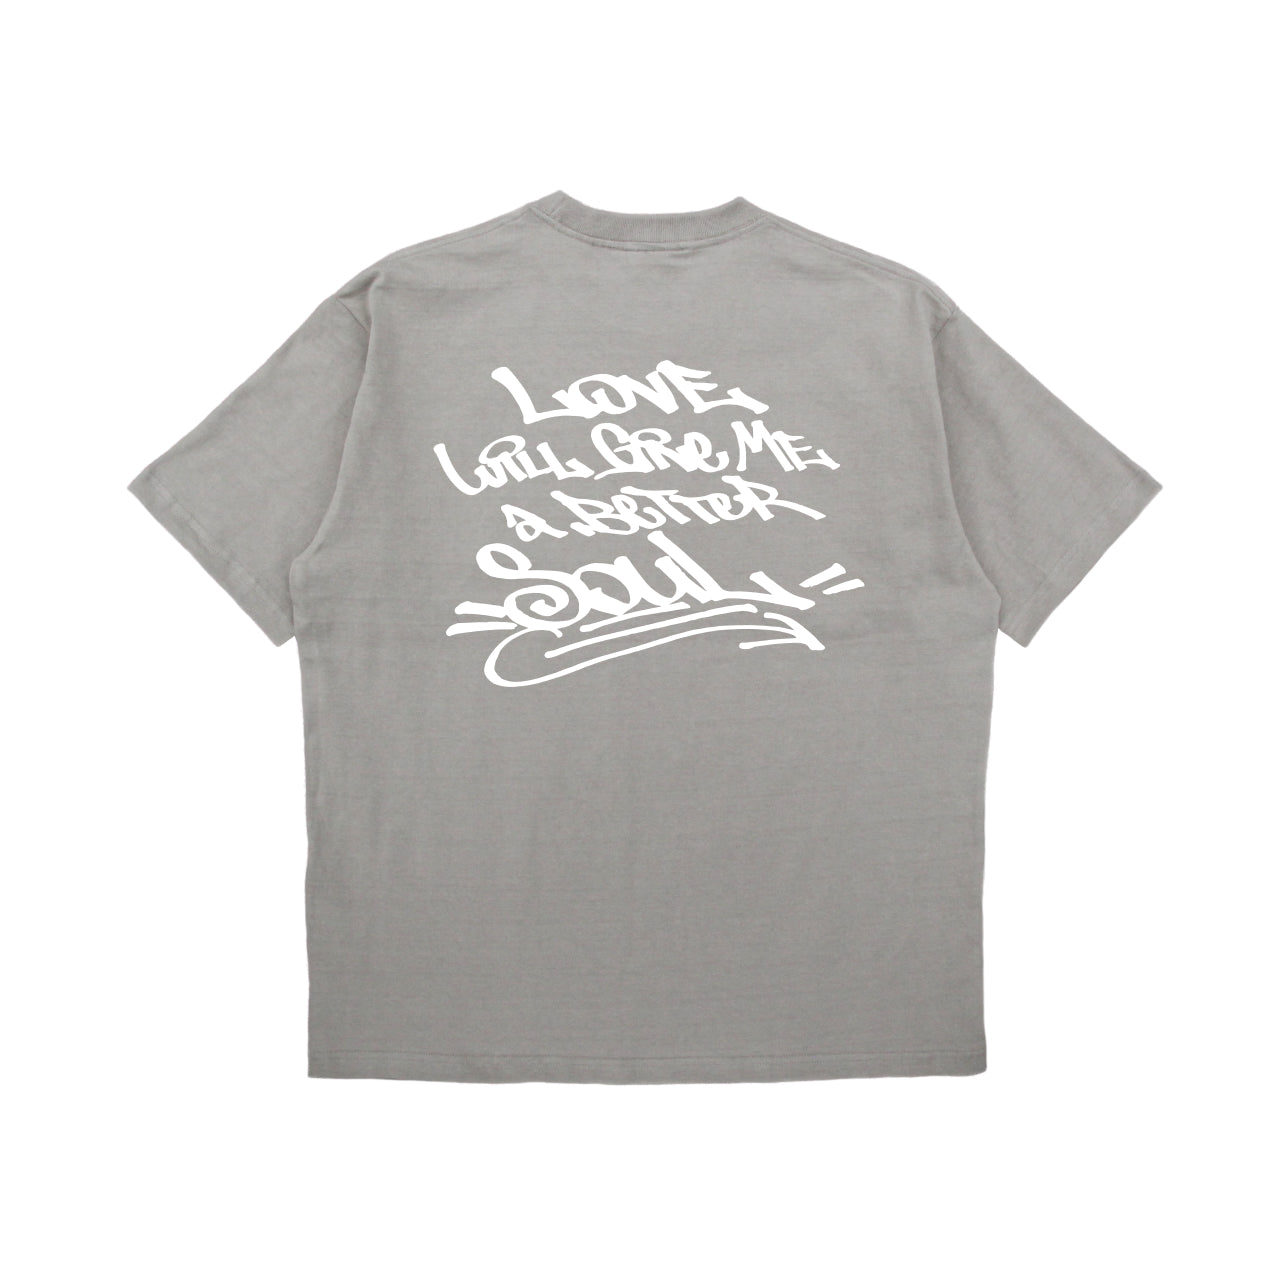 better soul tagging tee in greyish green